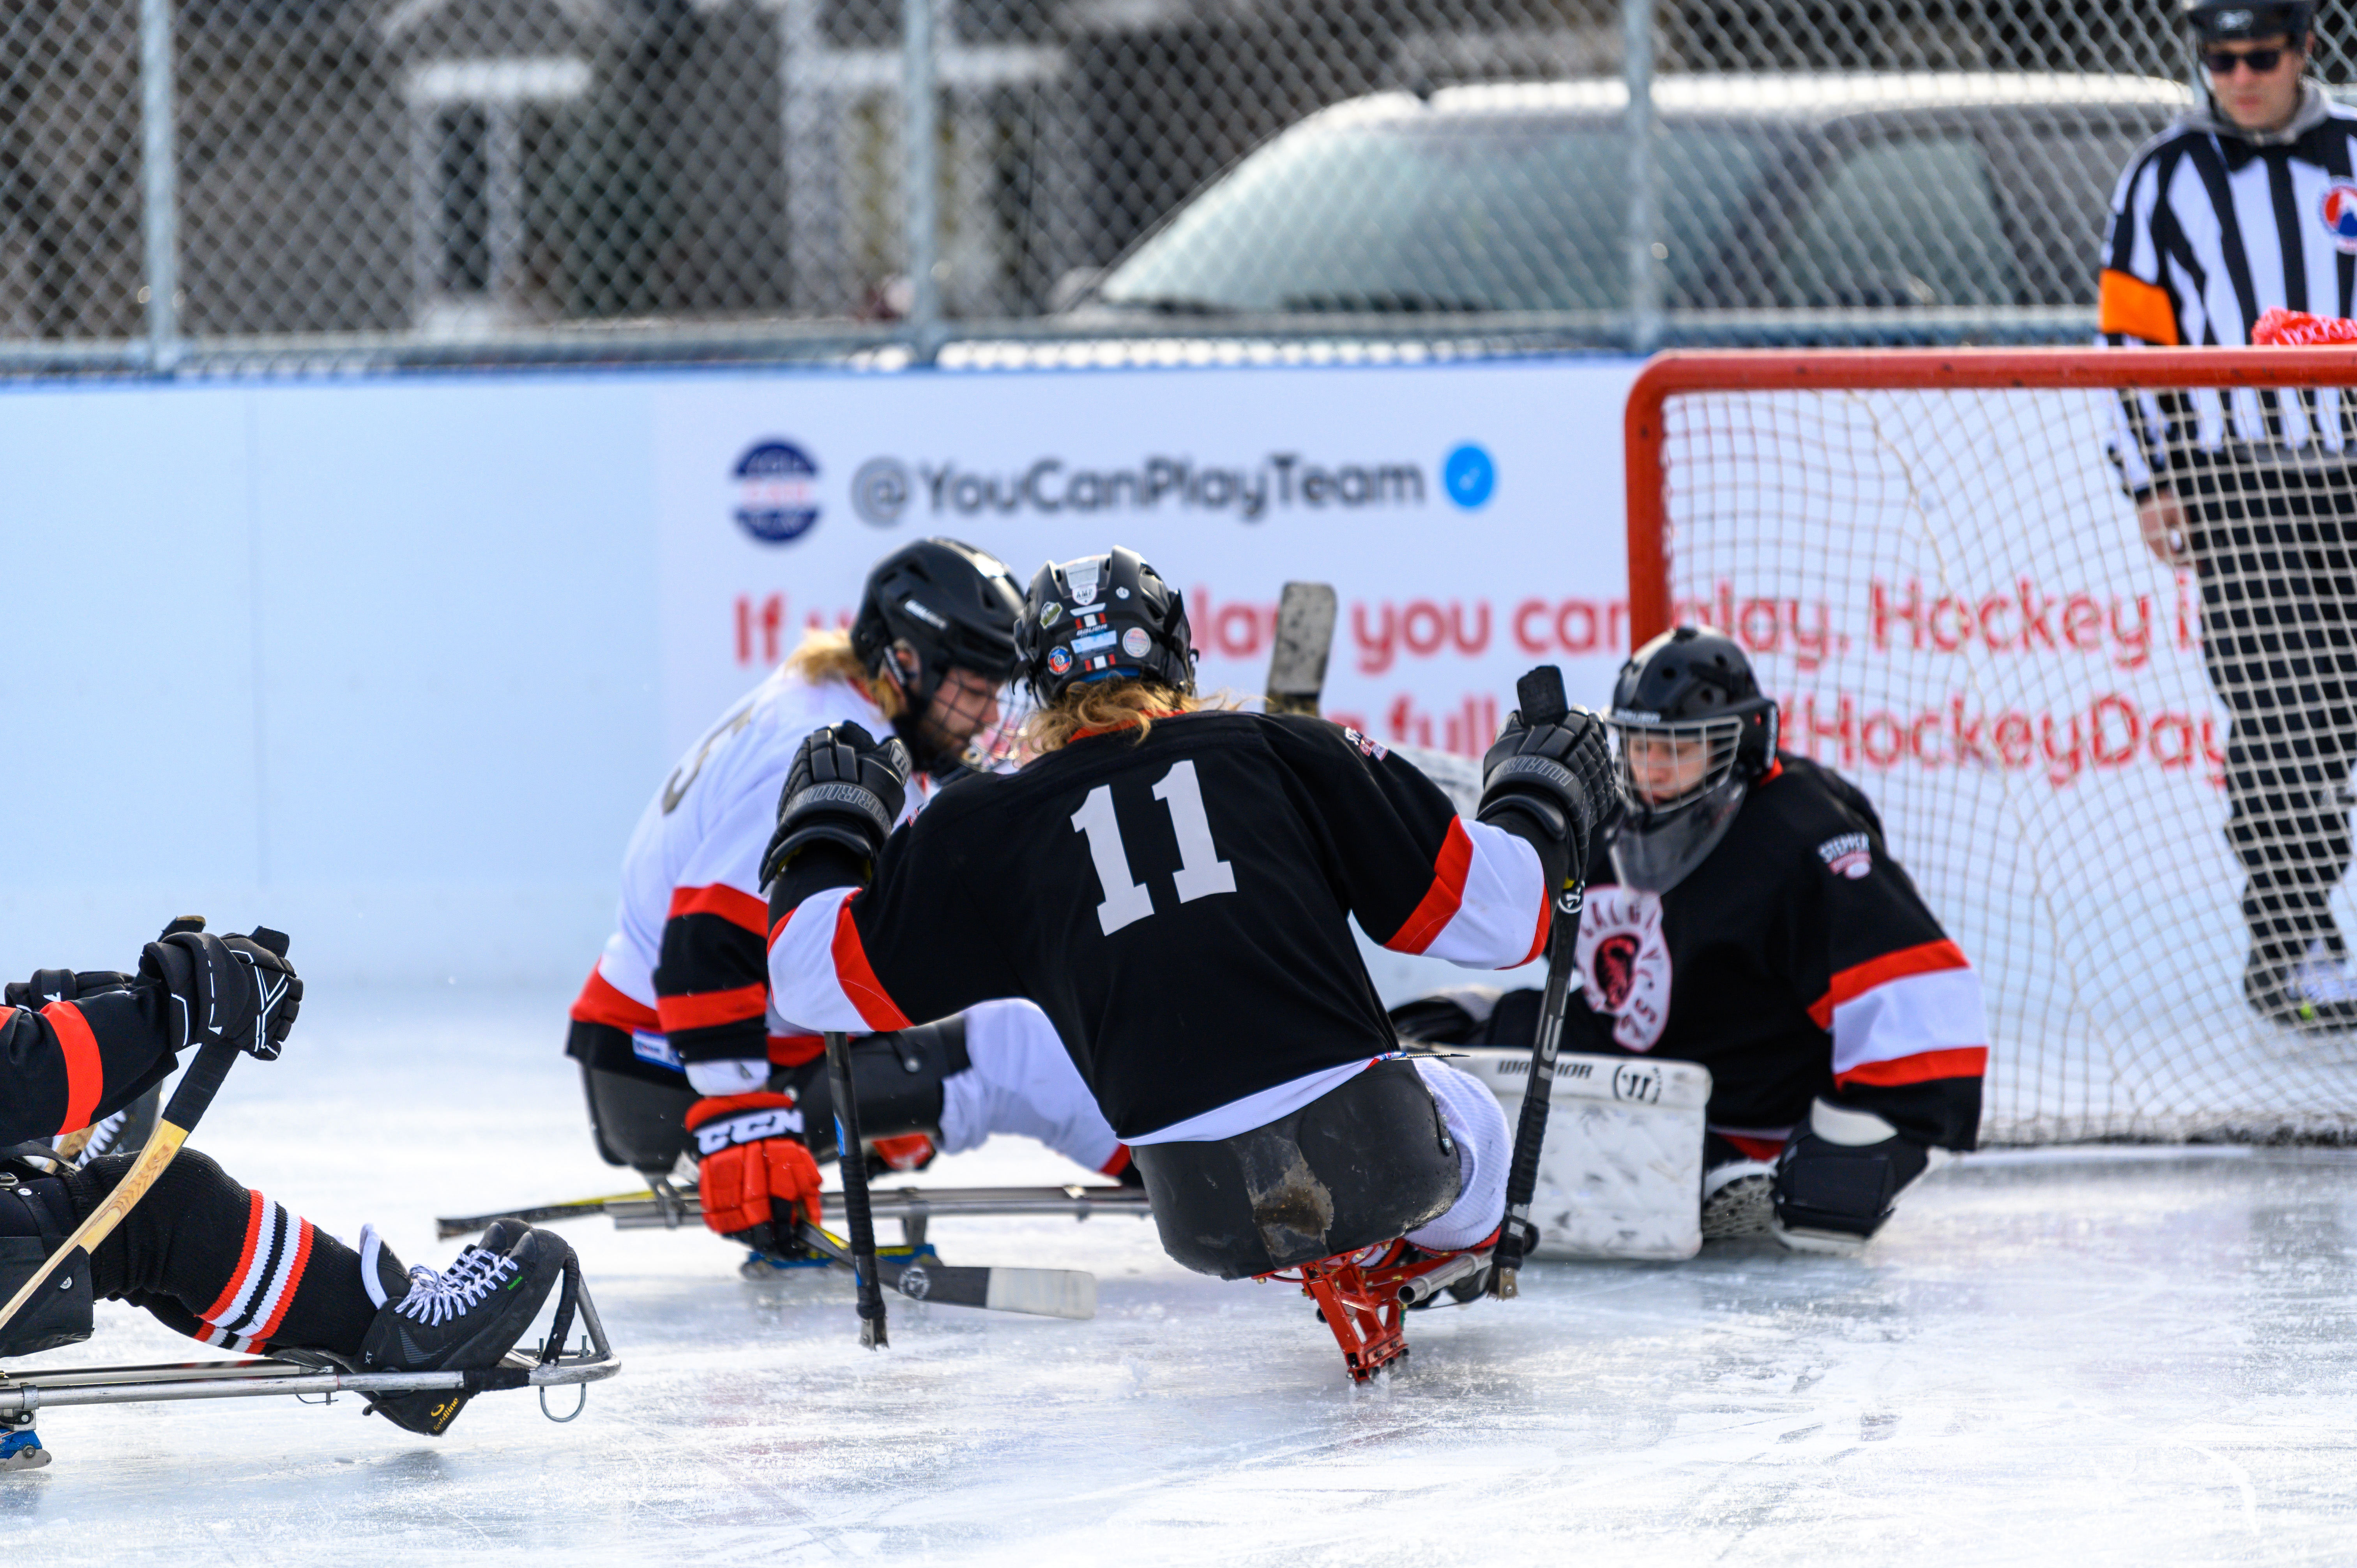 People playing sledge hockey close to the net. One team is wearing black jerseys and the other team is wearing white jerseys.